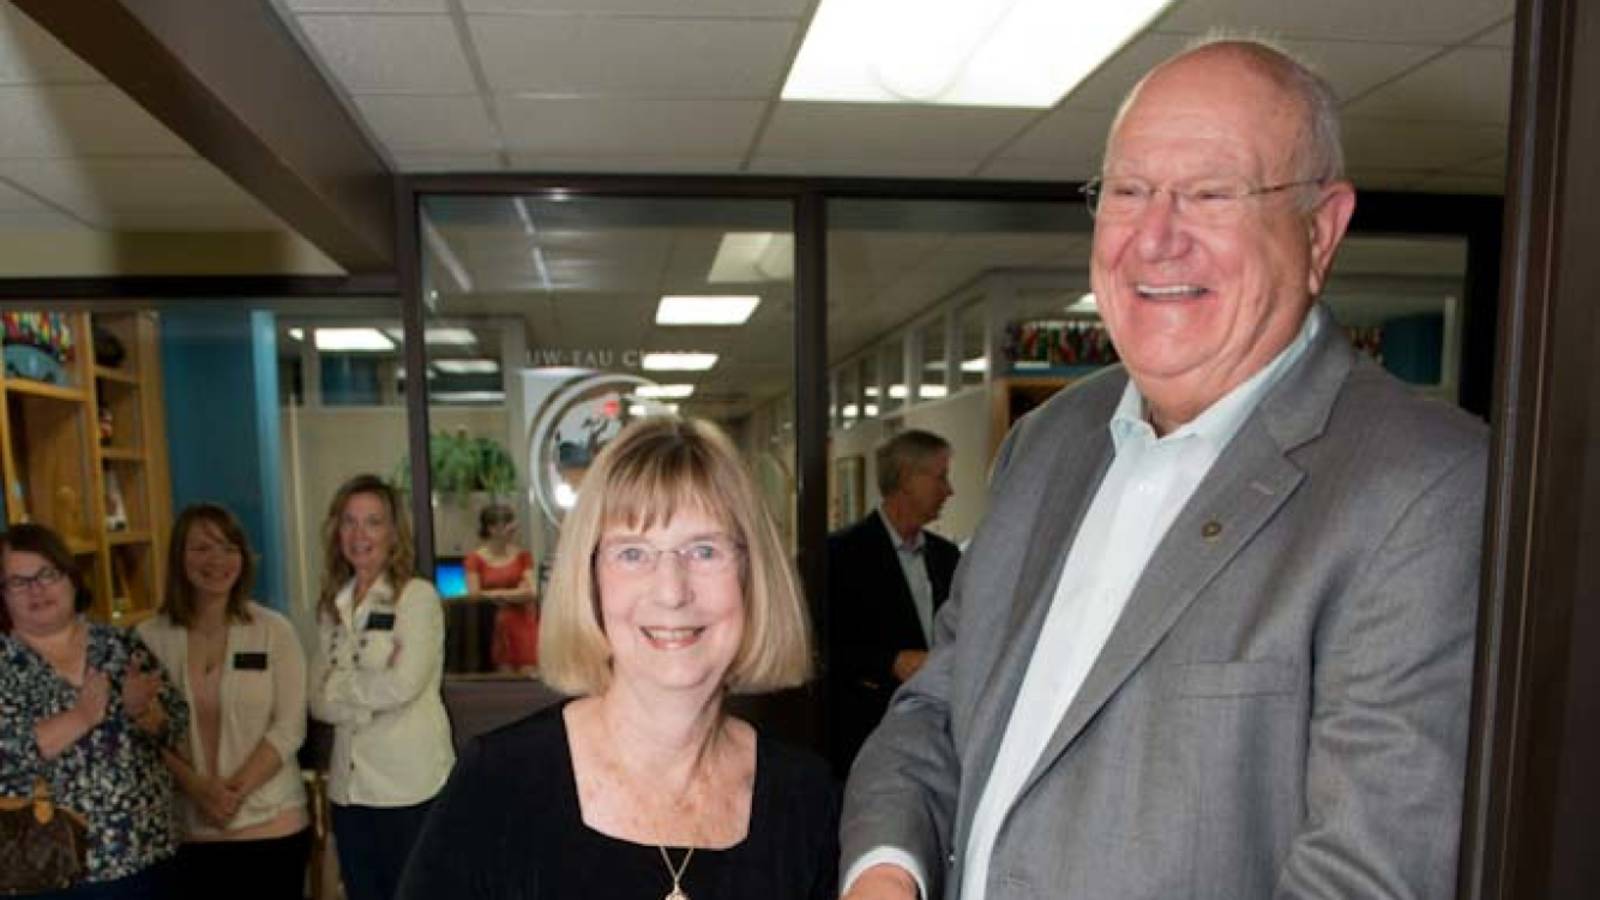 William J. and Marian A. Klish at the opening of the Health Careers Center.